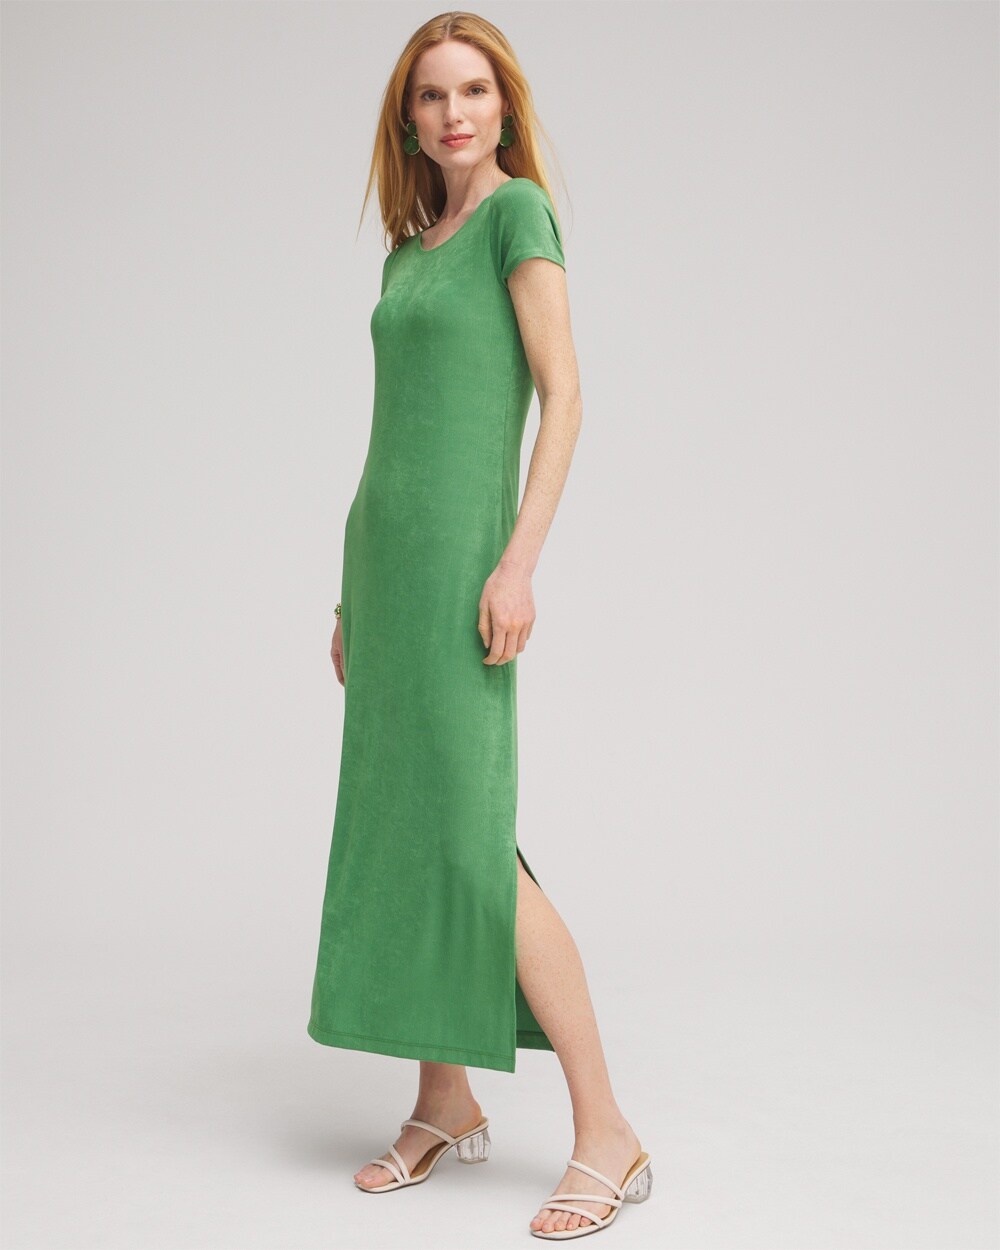 Travelers Classic Short Sleeve Maxi Dress video preview image, click to start video